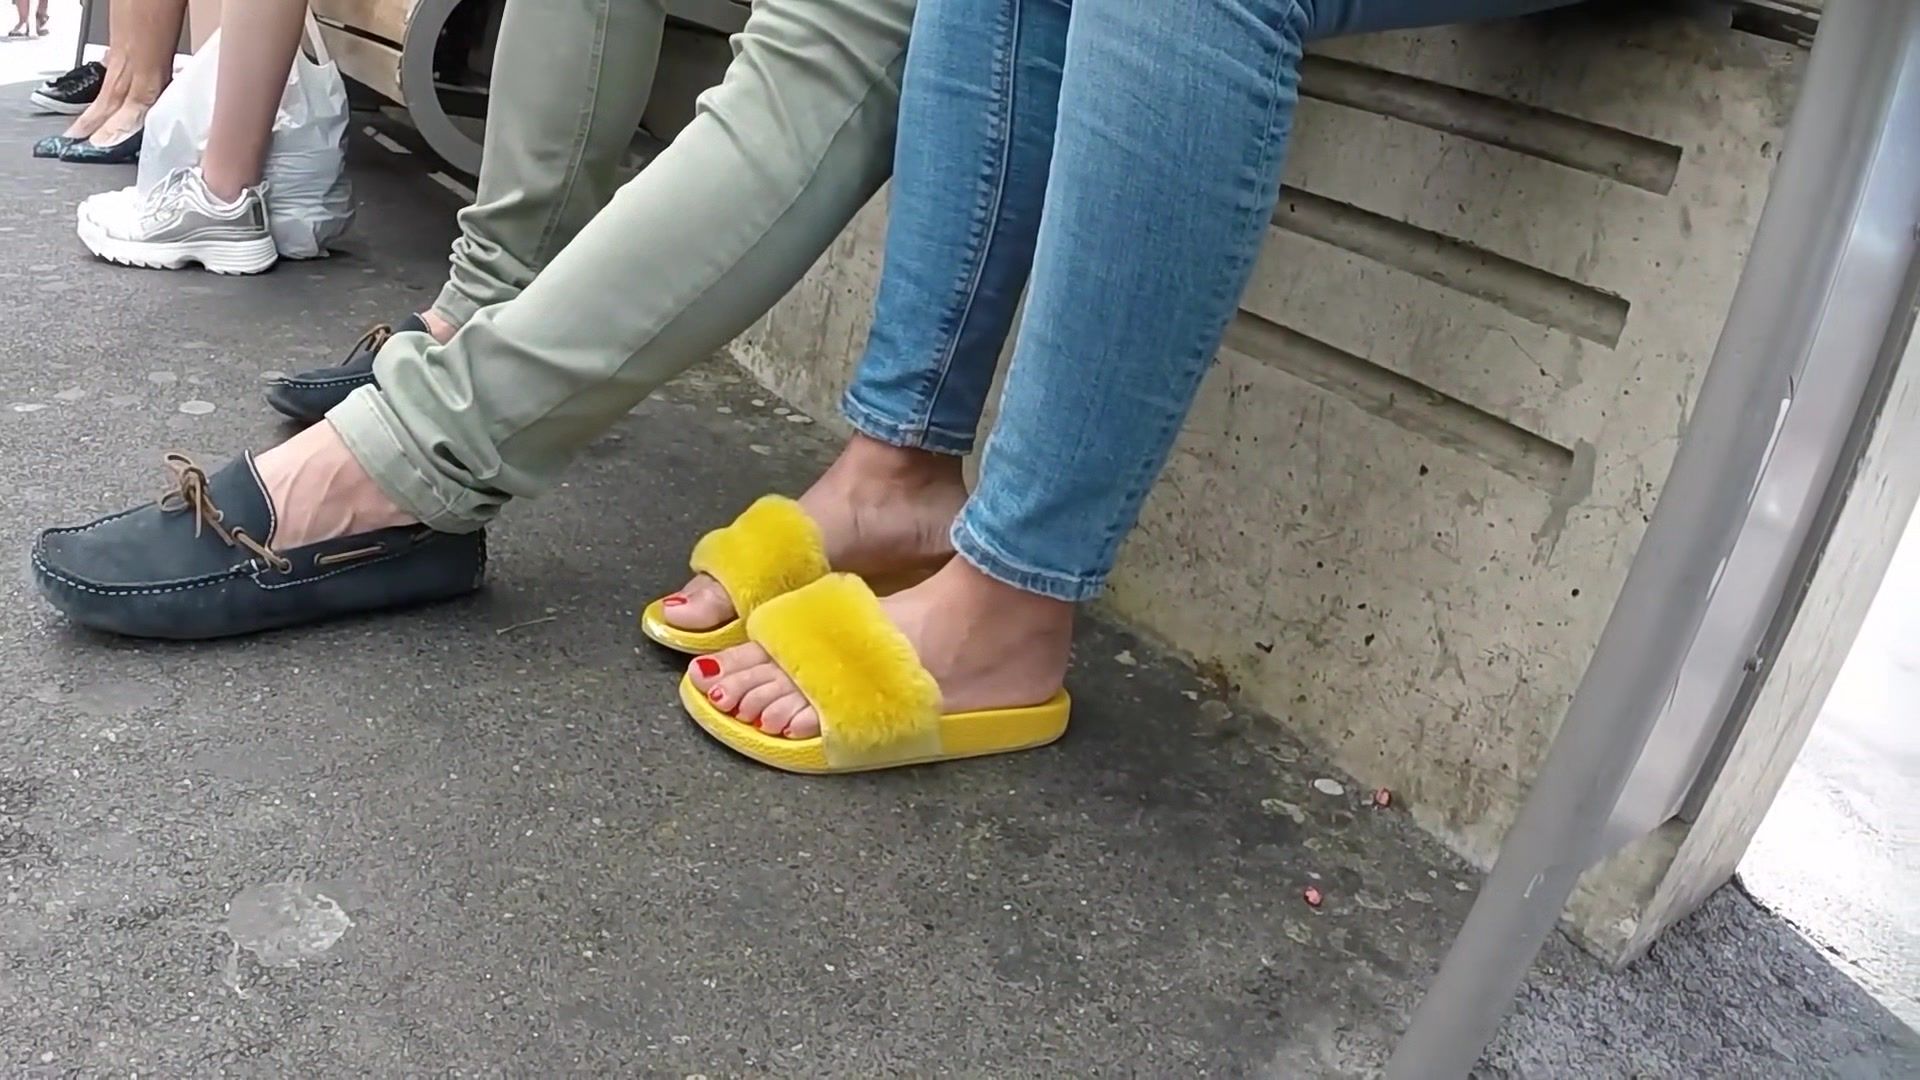 Police Sexy Feet In The Street HellXX